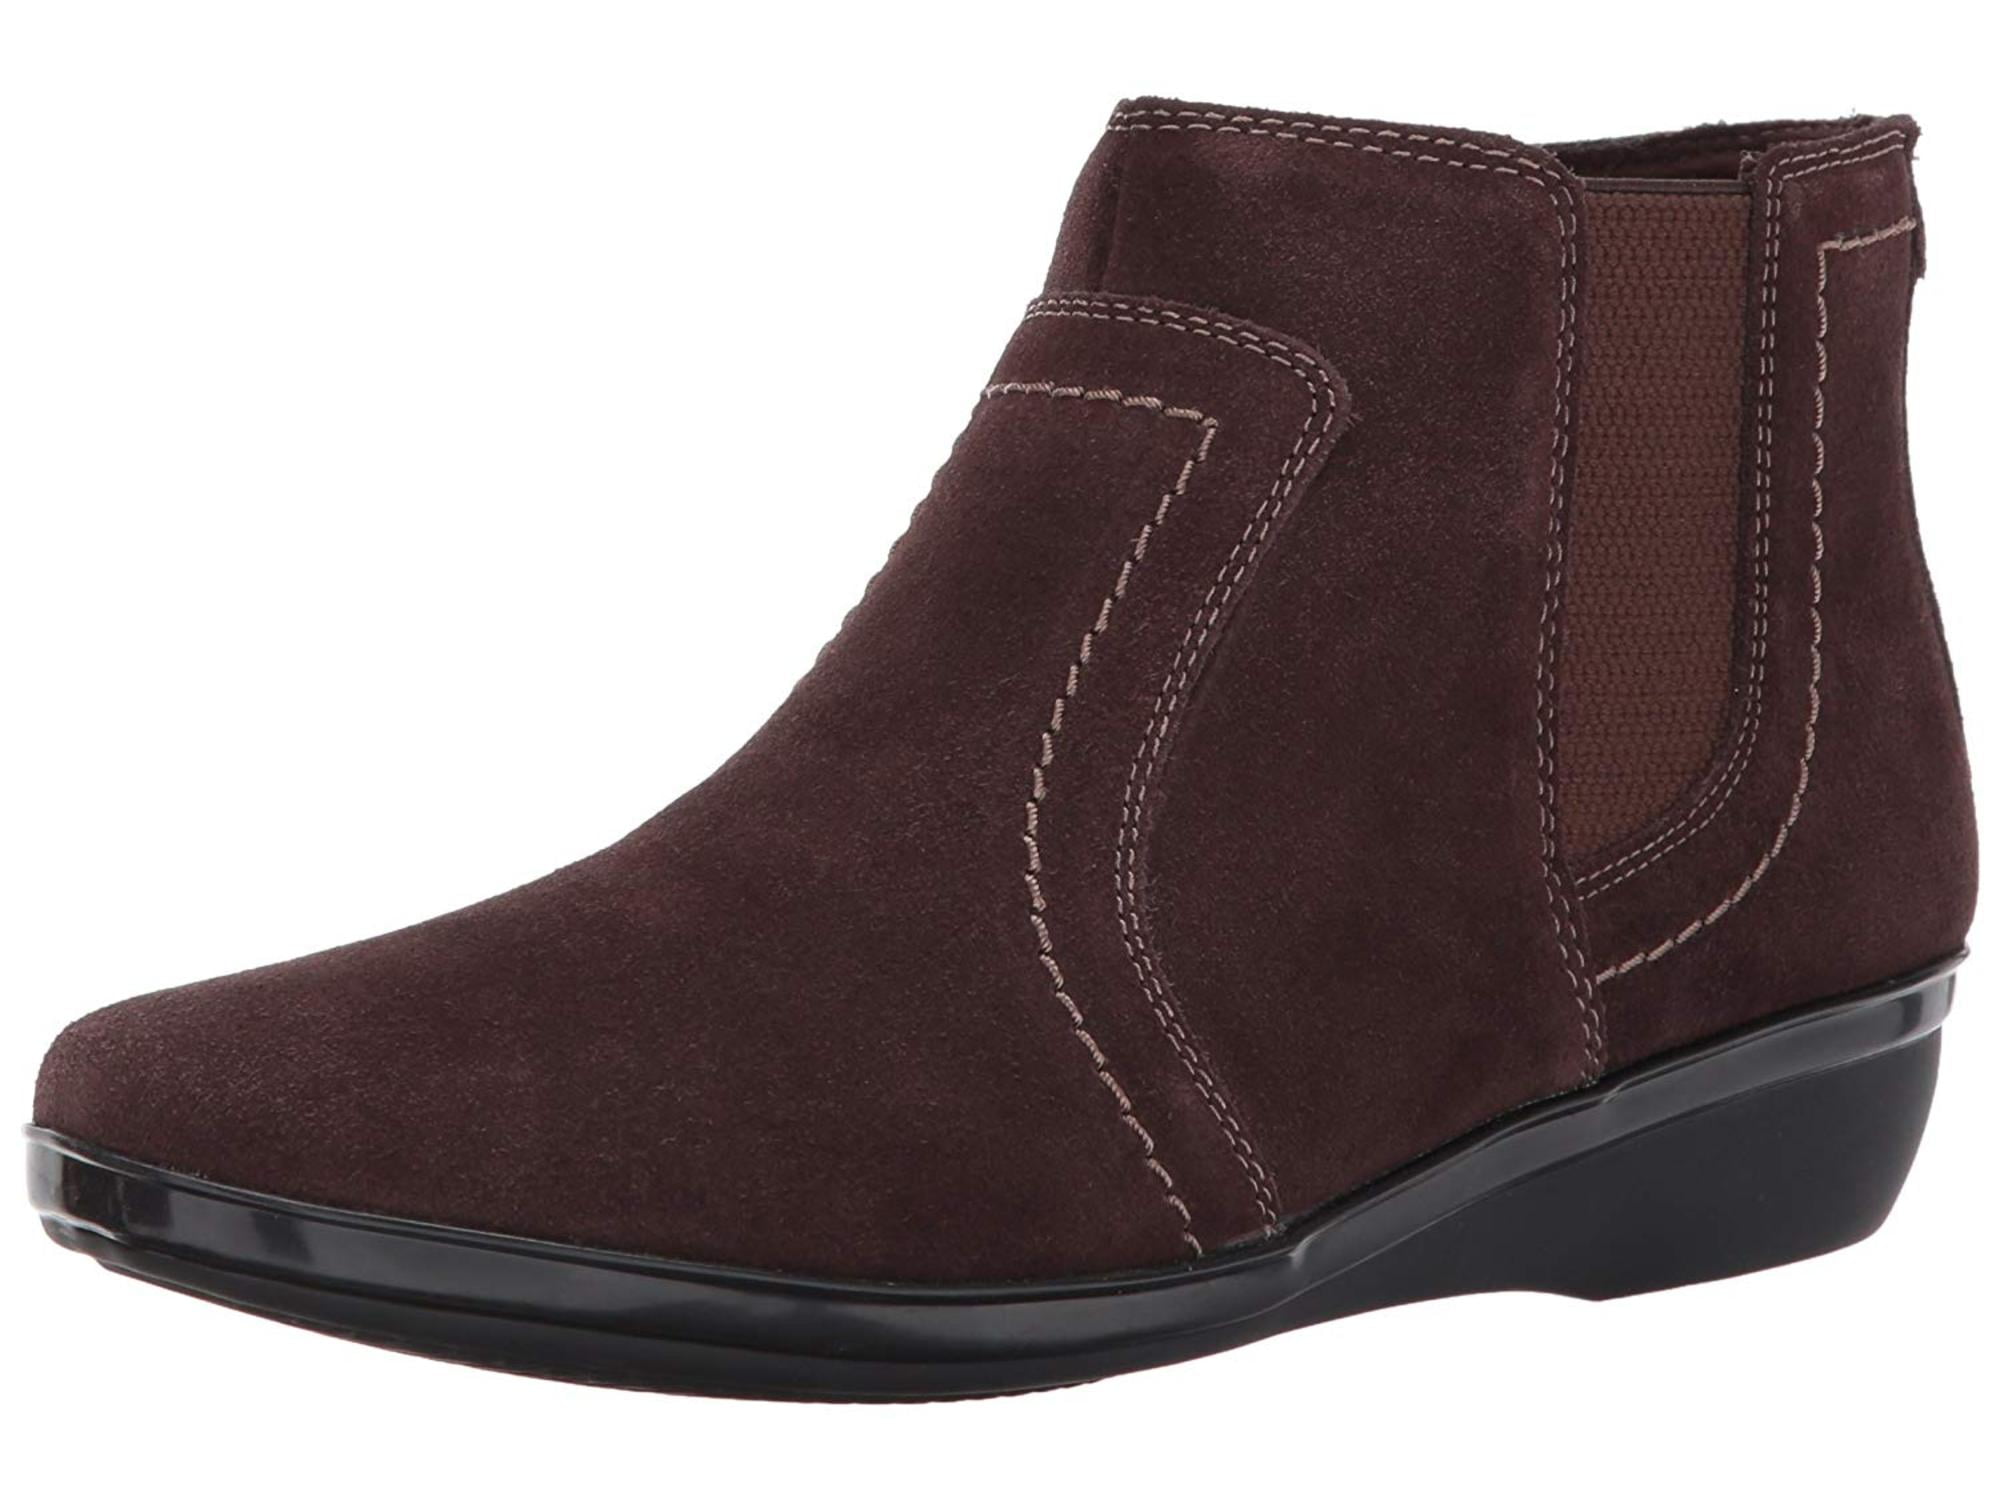 Clarks Womens Everlay Leigh Closed Toe Ankle Fashion Boots - Walmart.com